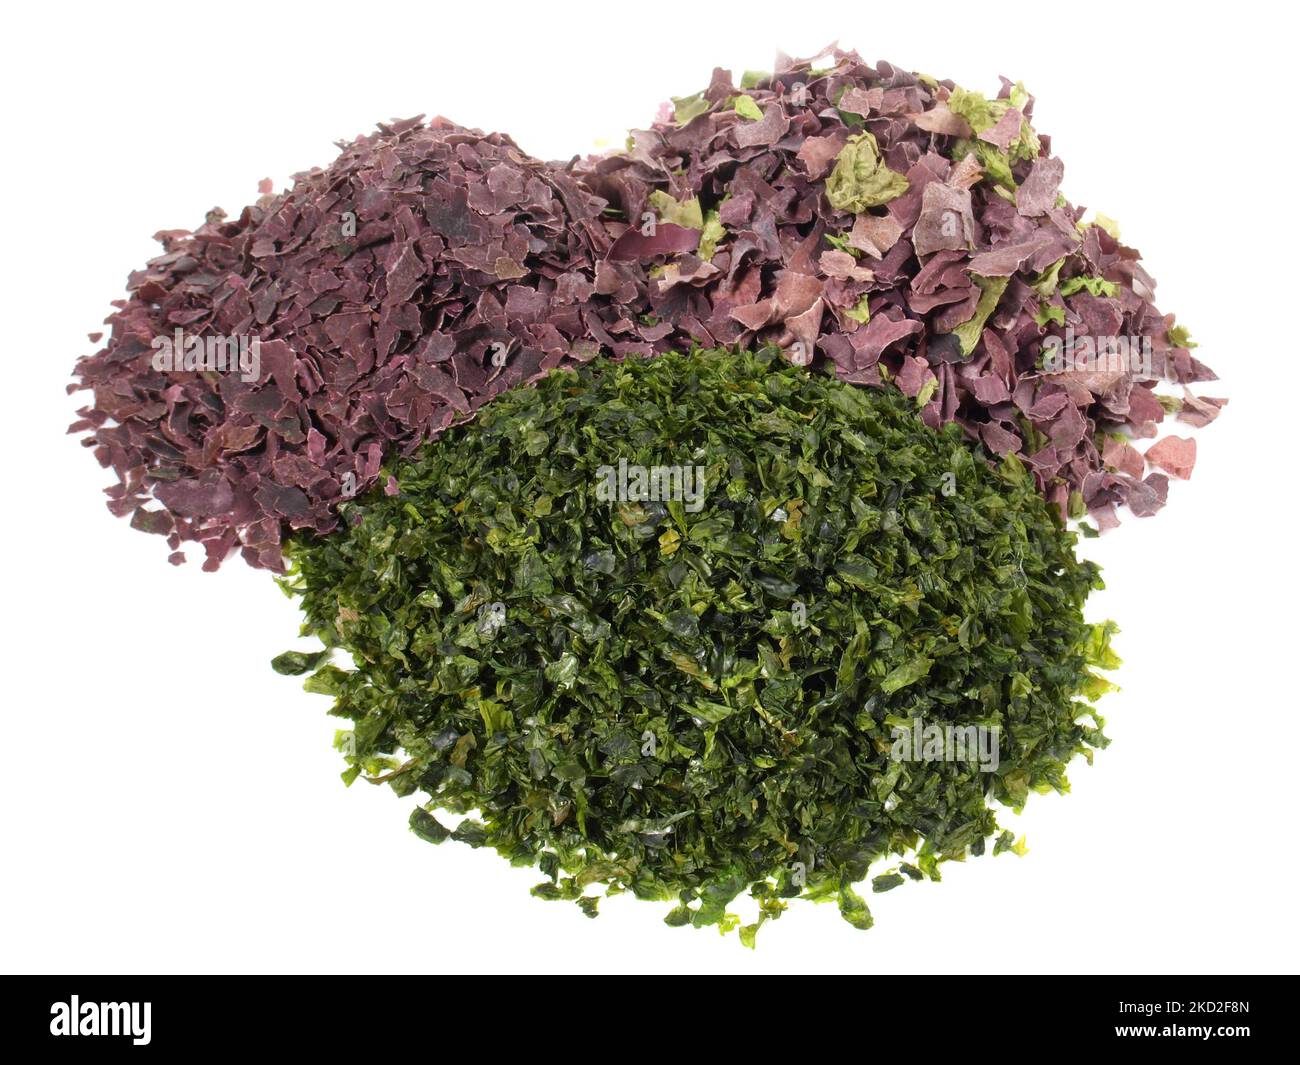 Dried Seaweed Mix - Healthy Nutrition on white Background Stock Photo